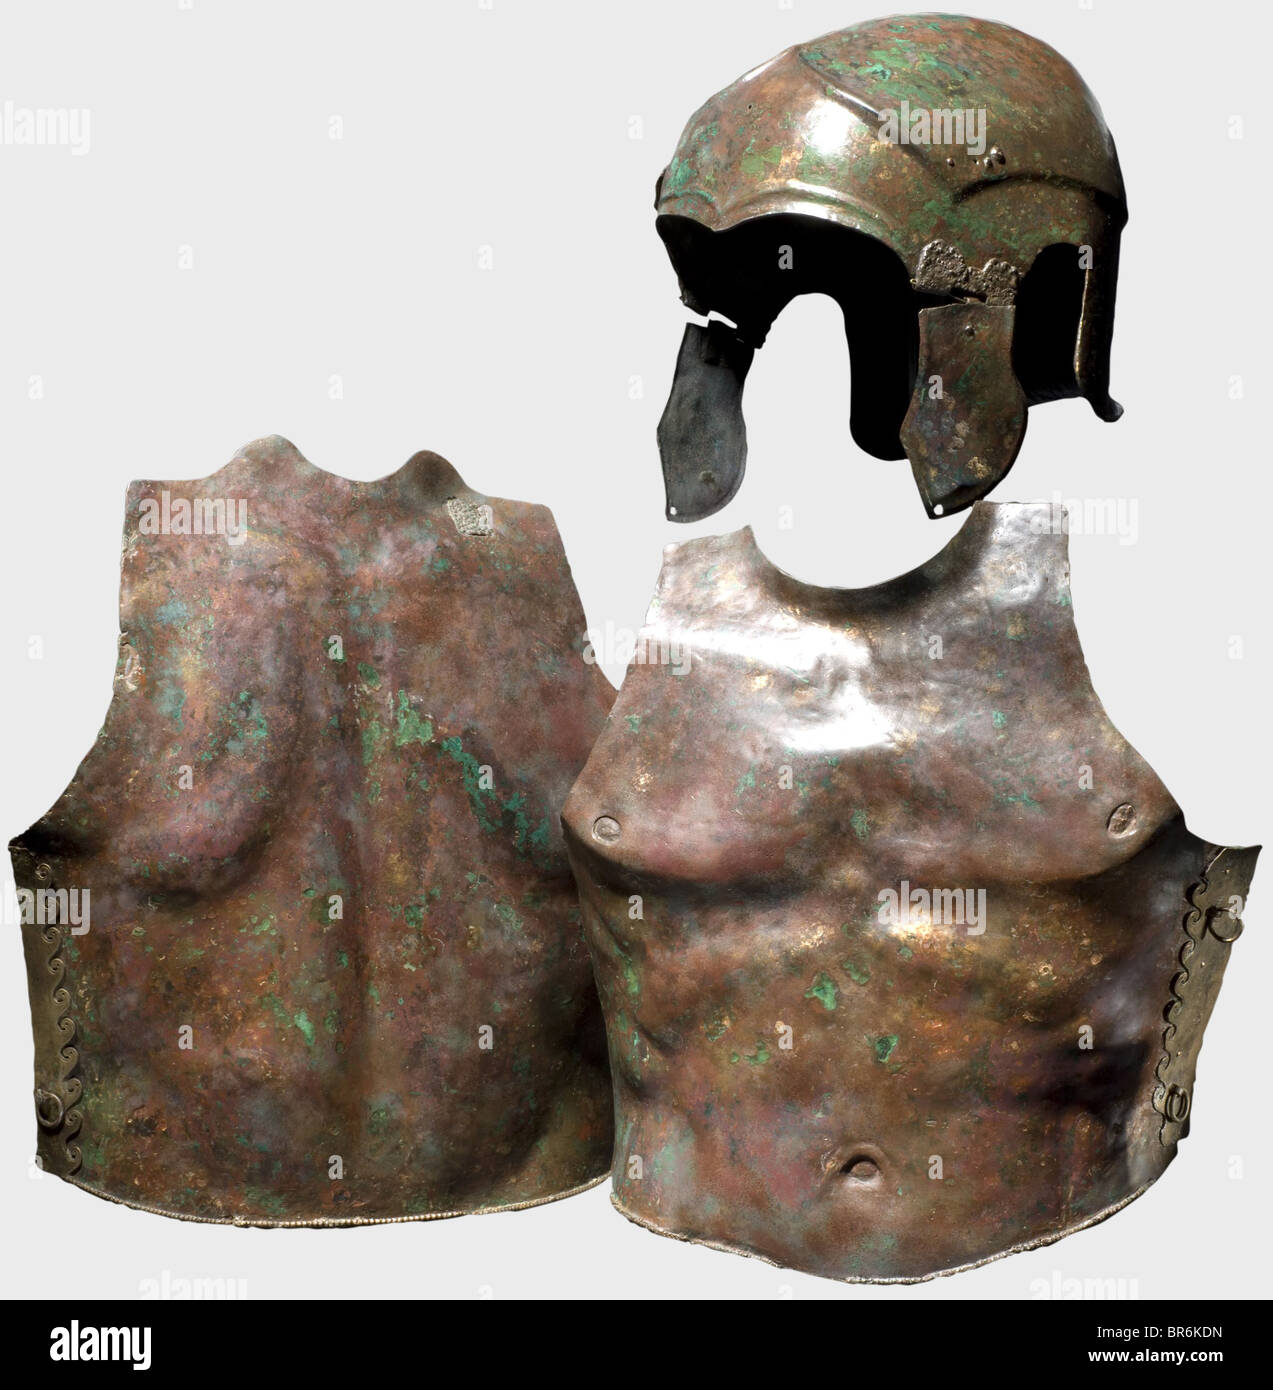 A Chalcidian helmet and muscle armour, 5th/4th century B.C. Bronze helmet with a clearly offset calotte, large ear cutouts, contoured brow gable and arched eye cutouts. Curved cheek pieces on hinges with large decorative plates. Holes in the forehead area and on the rear side. Remnants of a riveted wing adornment on the right side. Corresponding rivet holes on the left side. Height 25 cm, weight 868 g. Red-brown patina with green areas, numerous supplements, the interior reinforced with fibreglass. Axel Guttmann Collection (AG 460a, AG 602/H 151), acquired in 1, Stock Photo